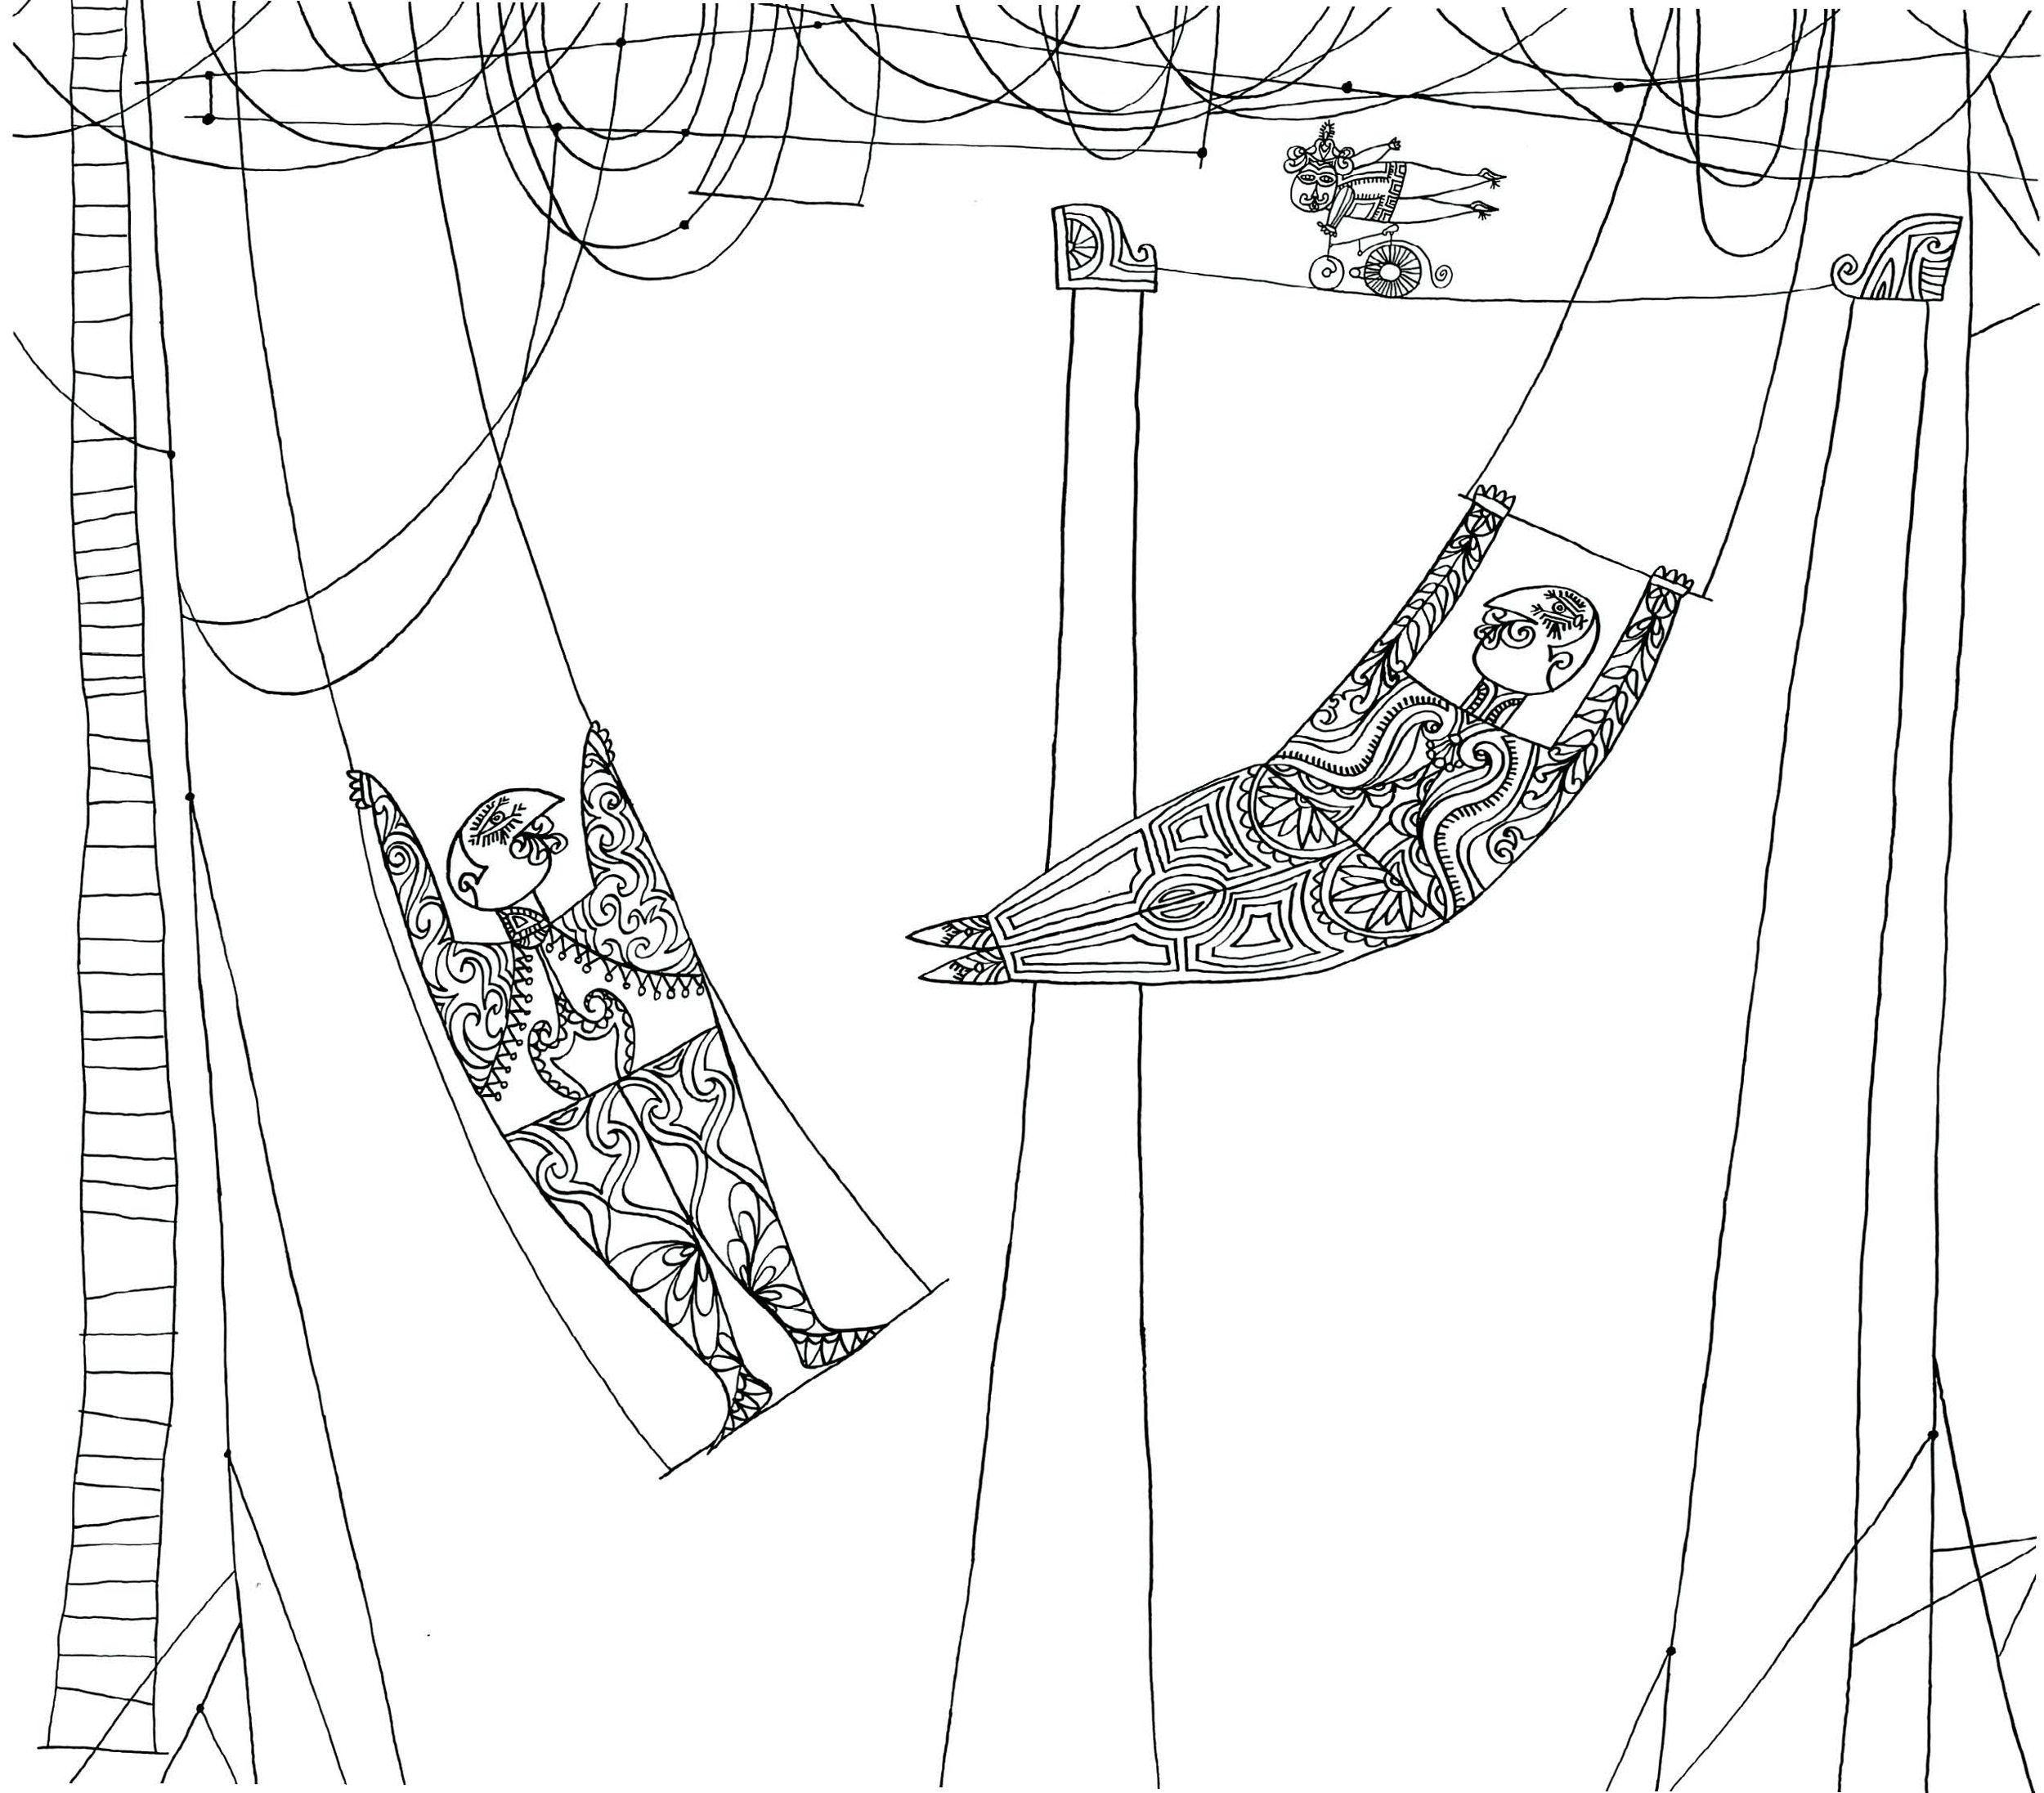   Trapeze Artists    Ink on paper 1956   